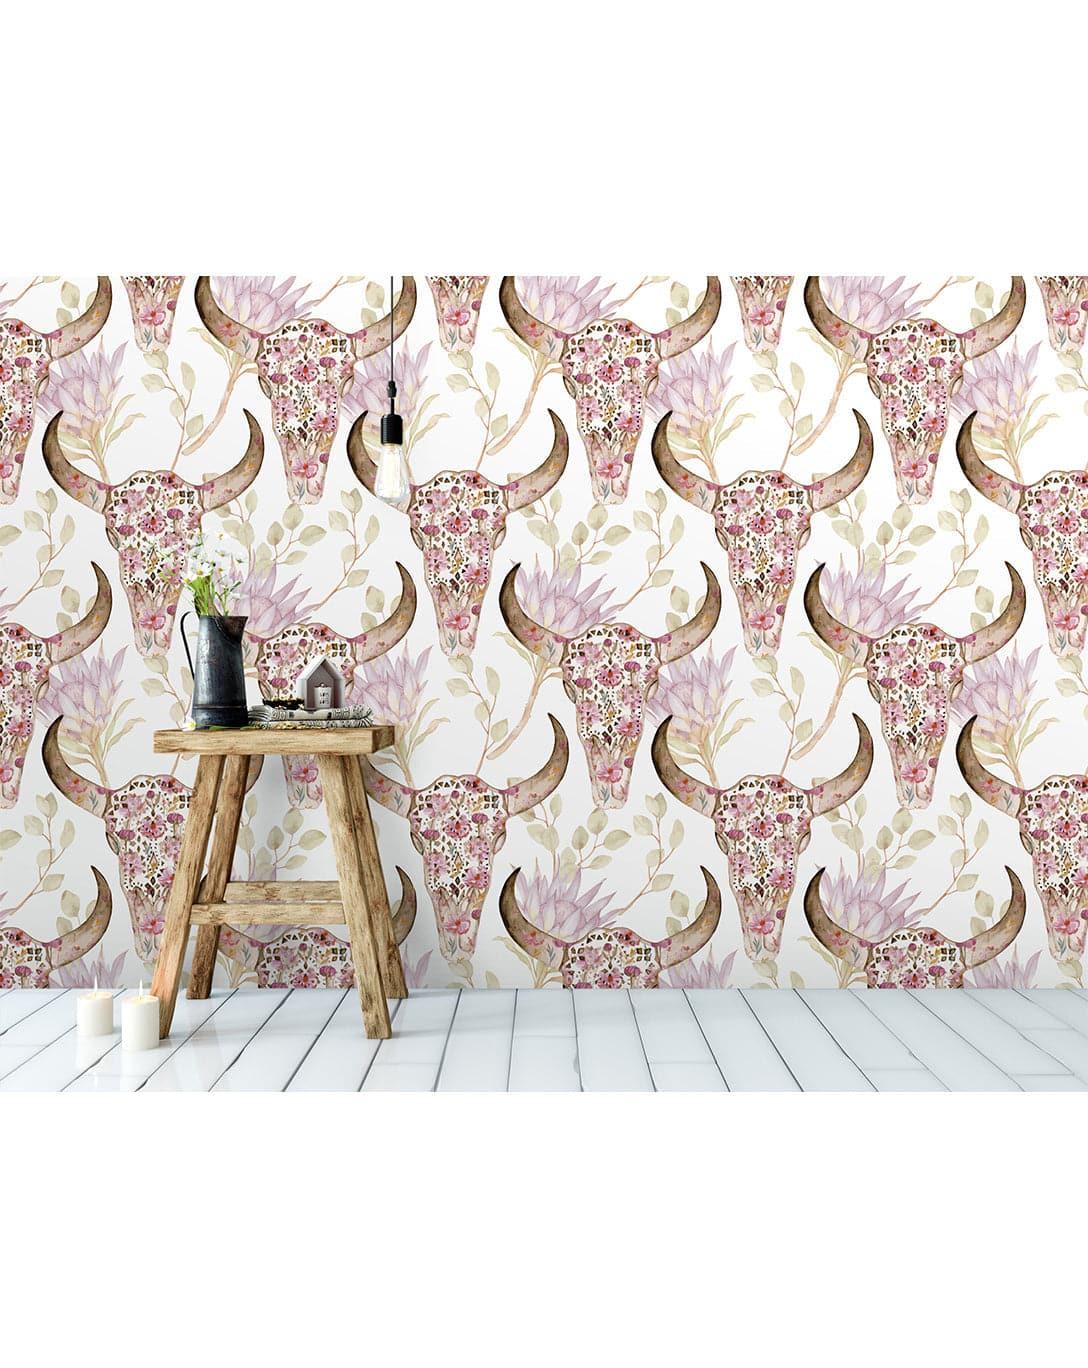 Protea Flowers With Skulls Removable Wallpaper Protea Flowers With Skulls Removable Wallpaper 